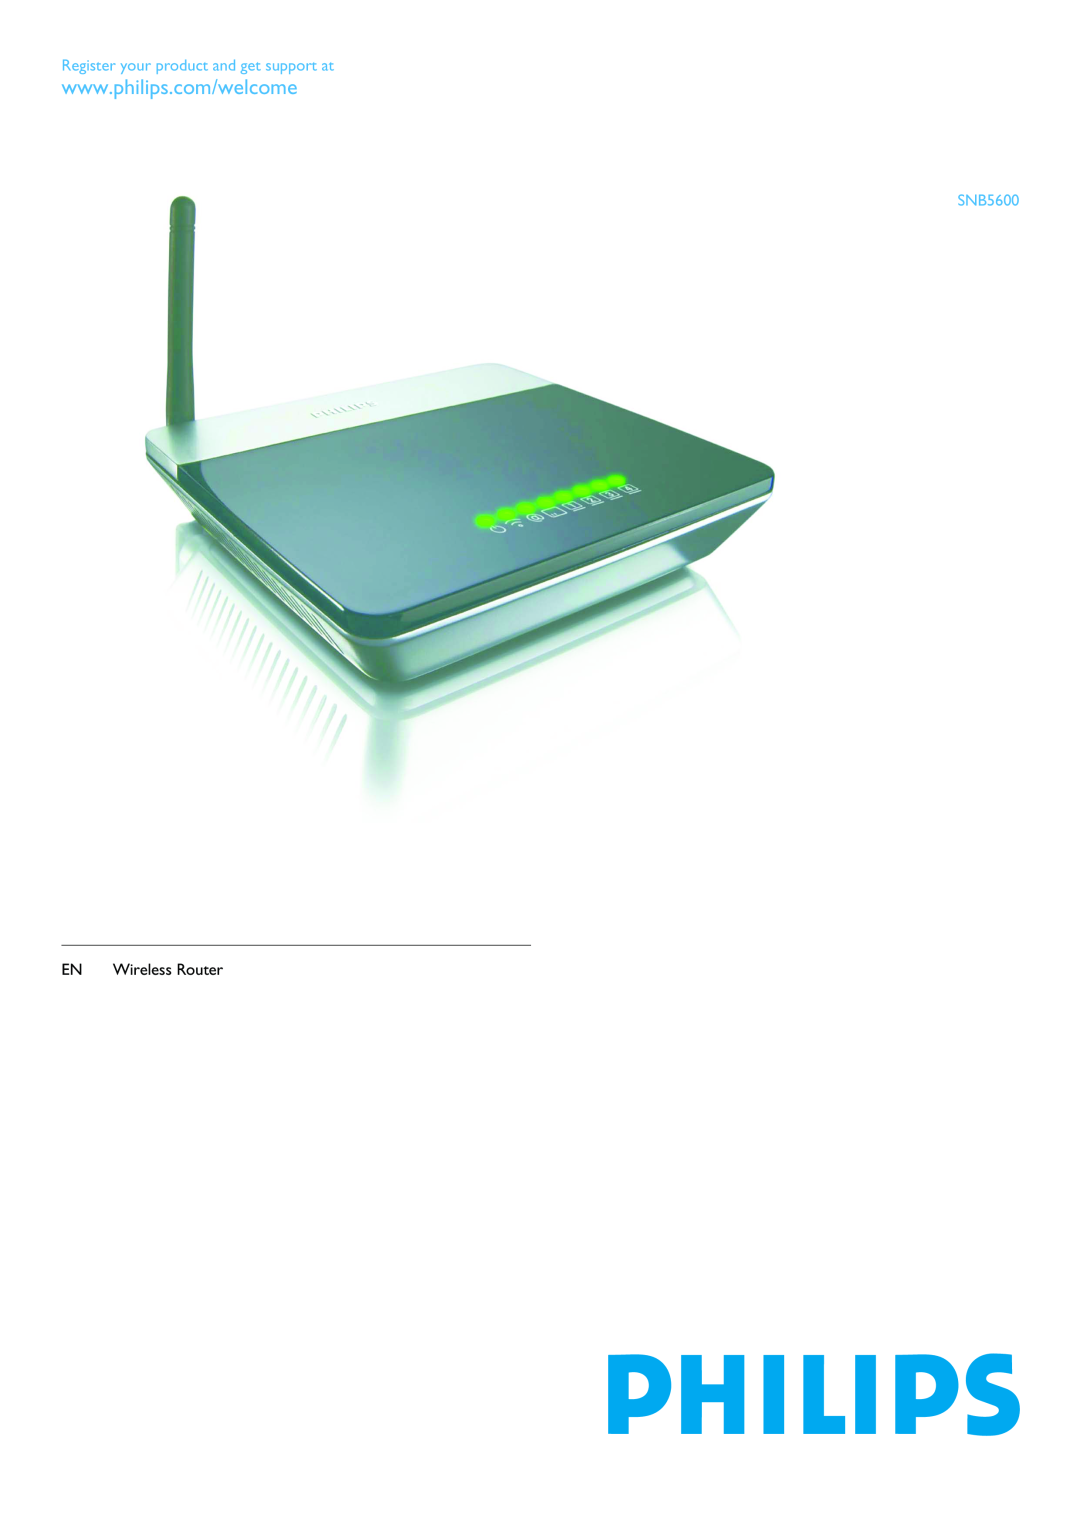 Philips SNB5600 manual Register your product and get support at, EN Wireless Router 